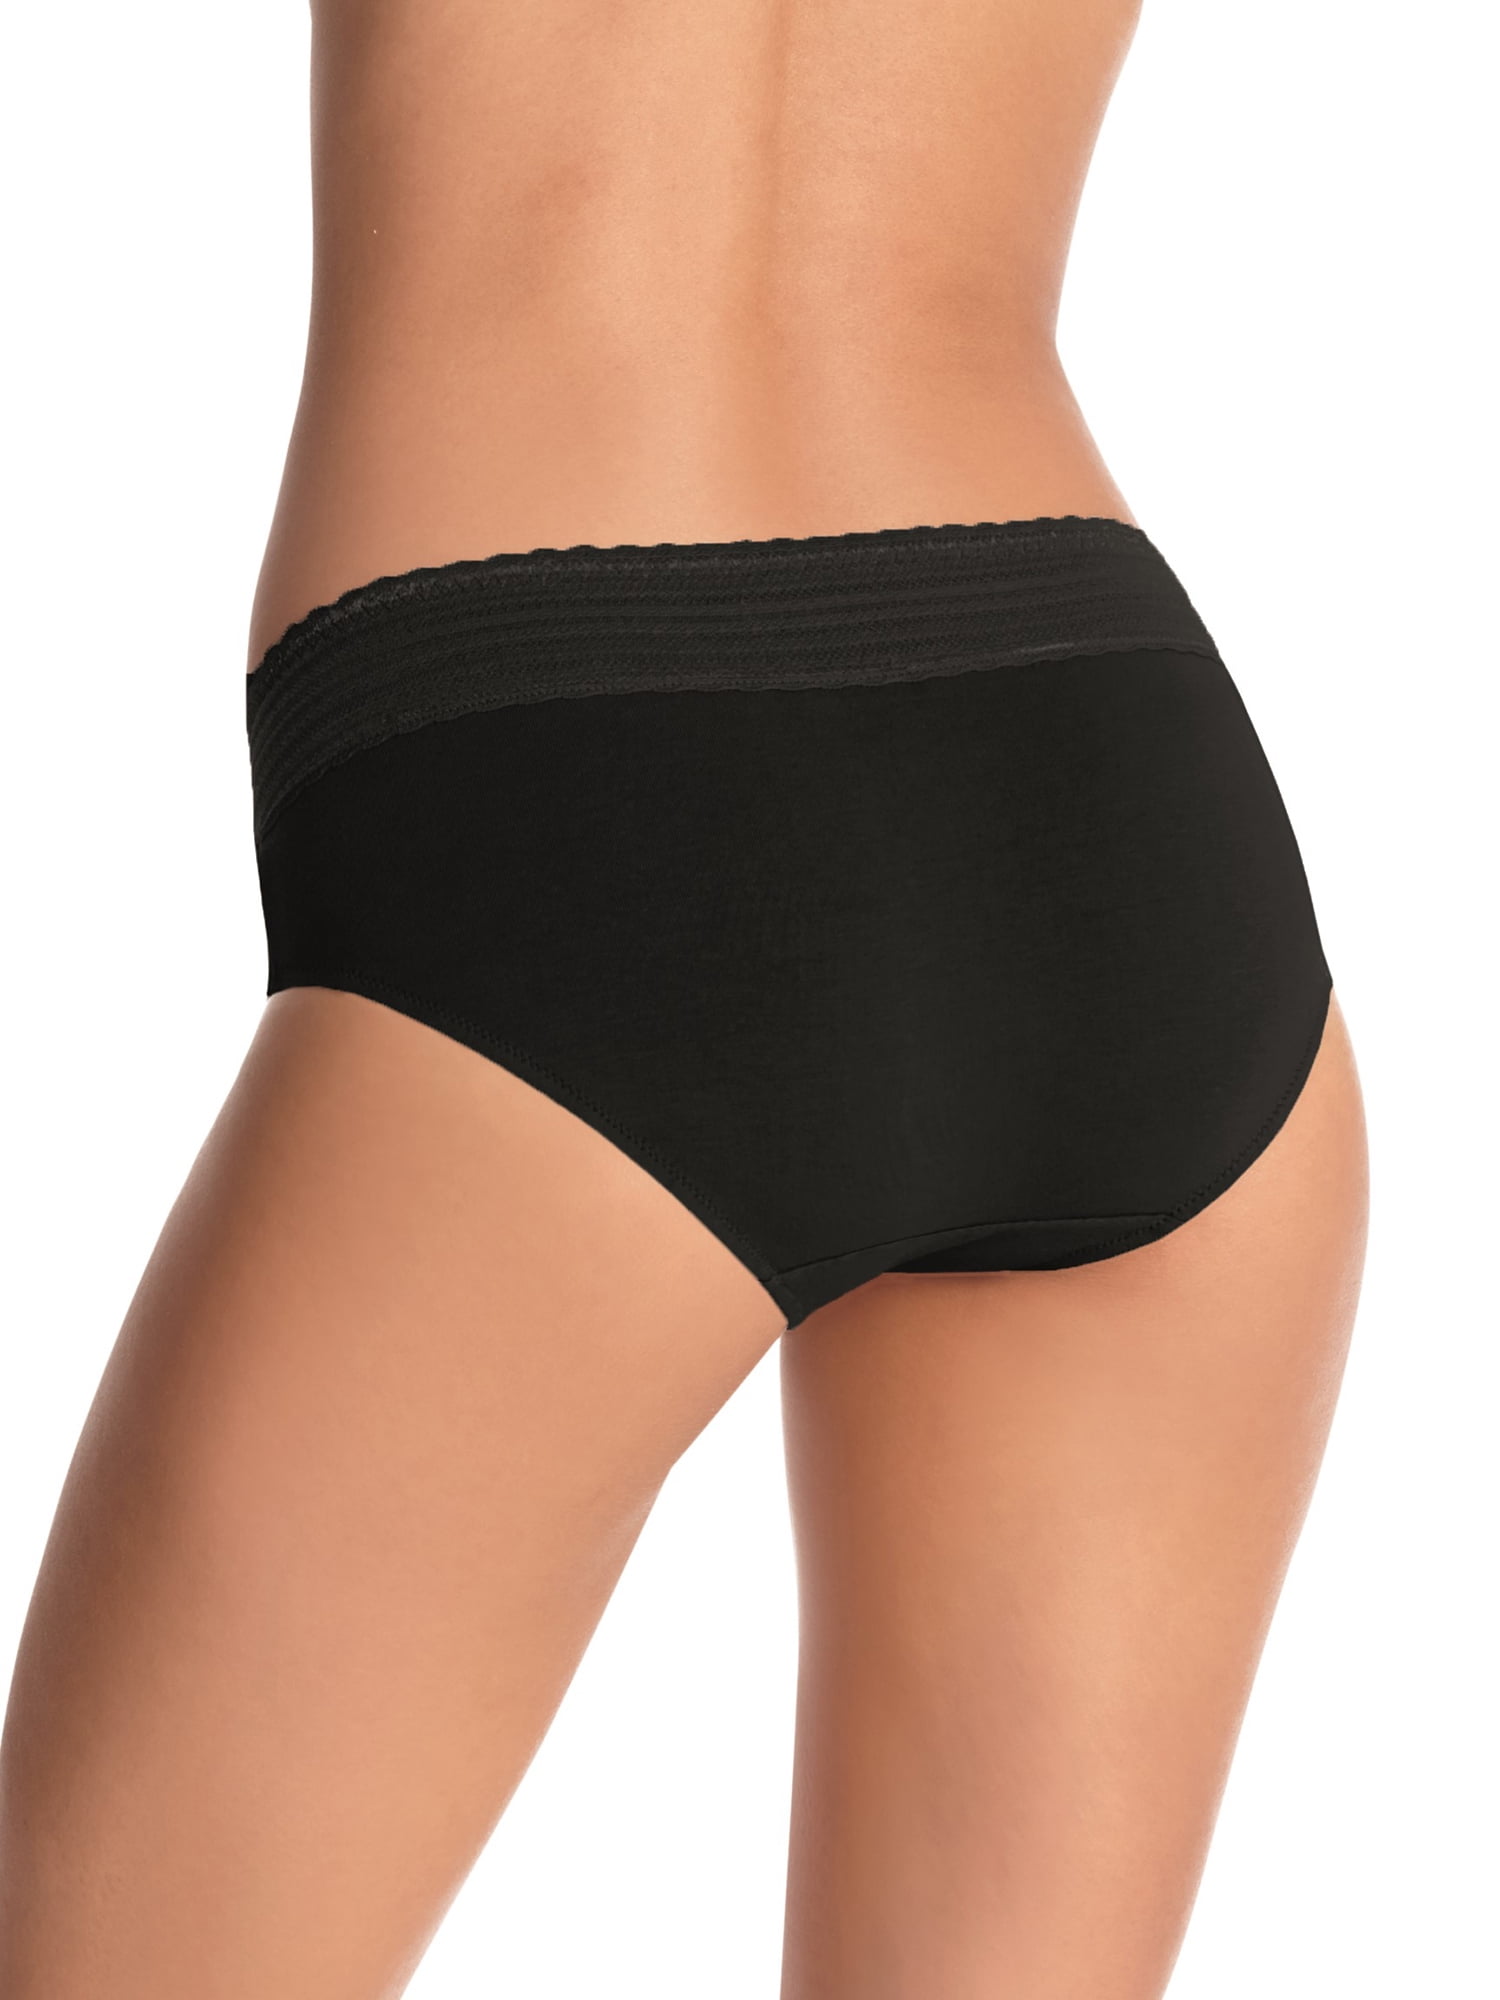 Warner's Women's No Muffin Top No Pinching Hipster Panty with Lace 4-Pack  (2 Beige/Black Dots/Black, S (5)) 